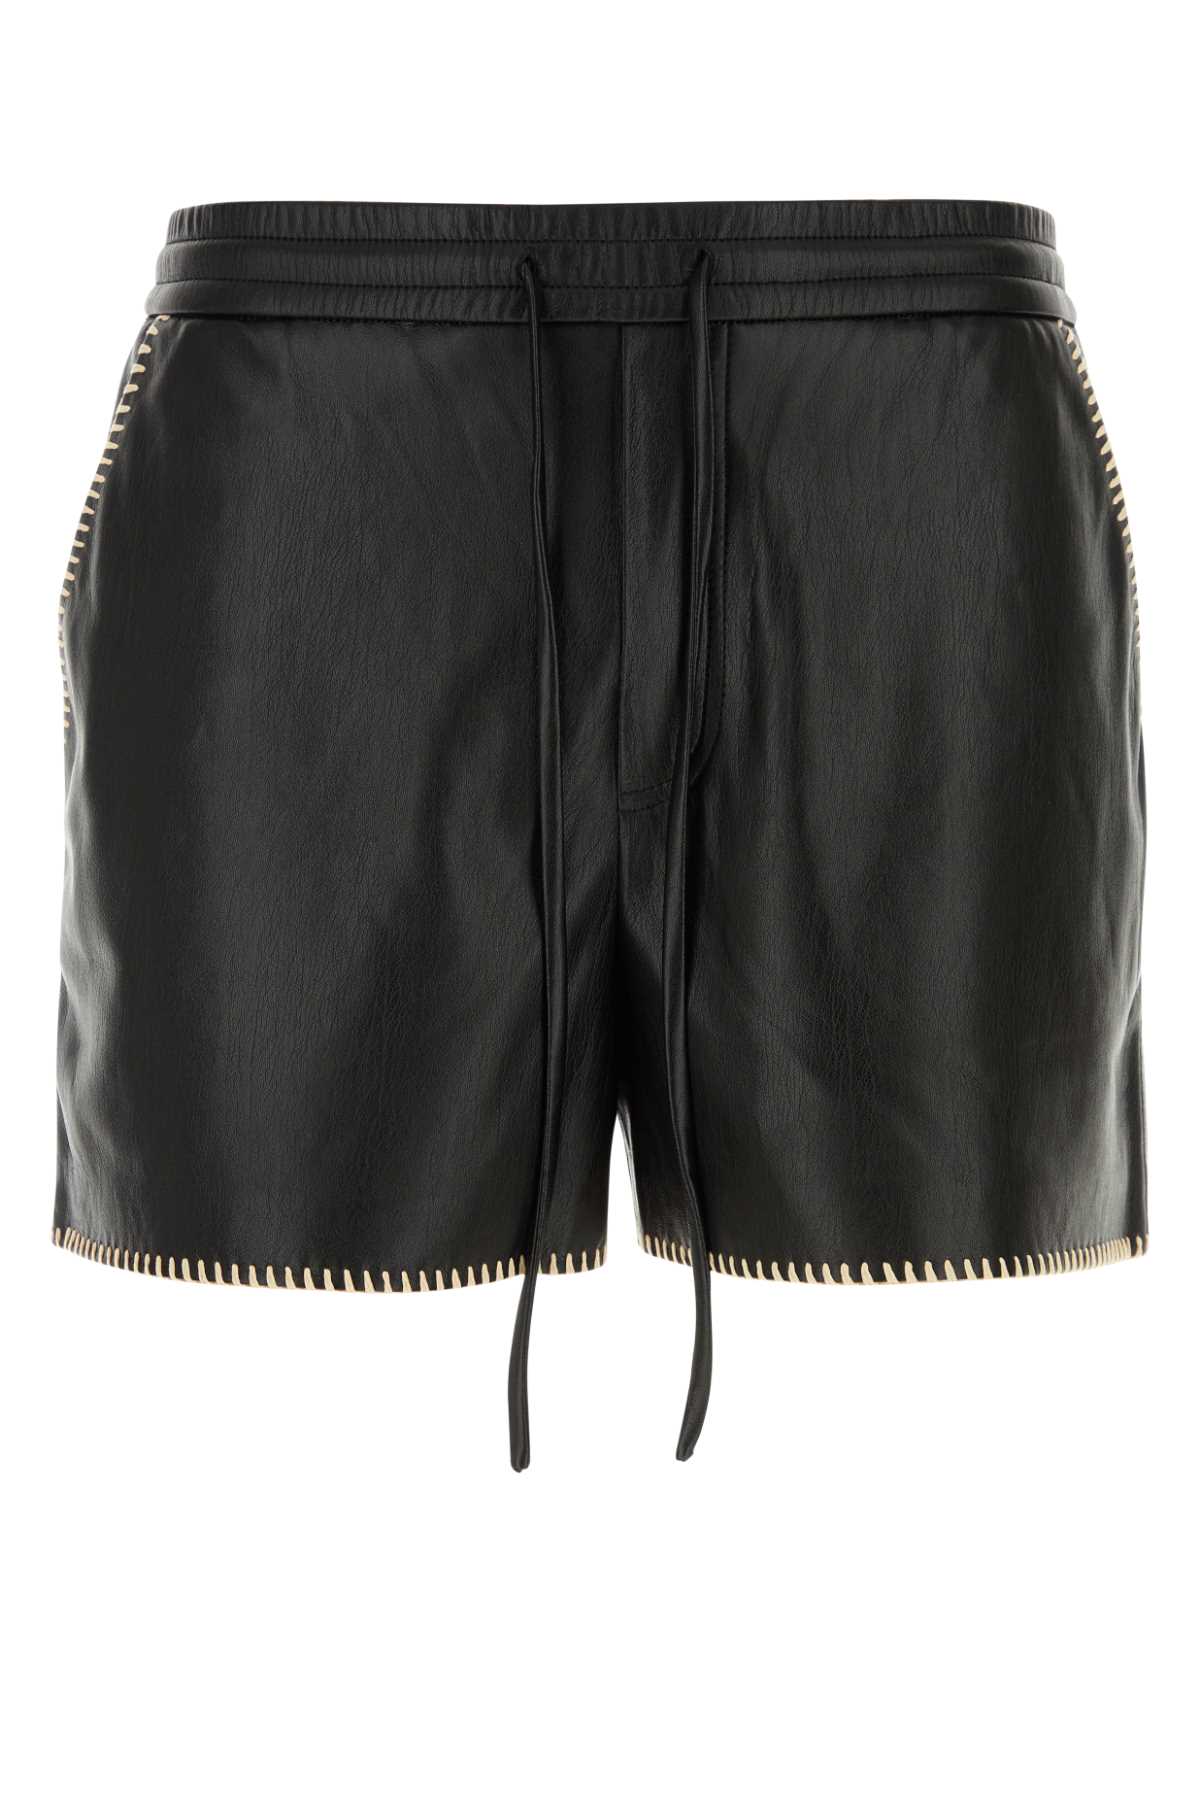 Black Synthetic Leather Amil Bermuda Shorts